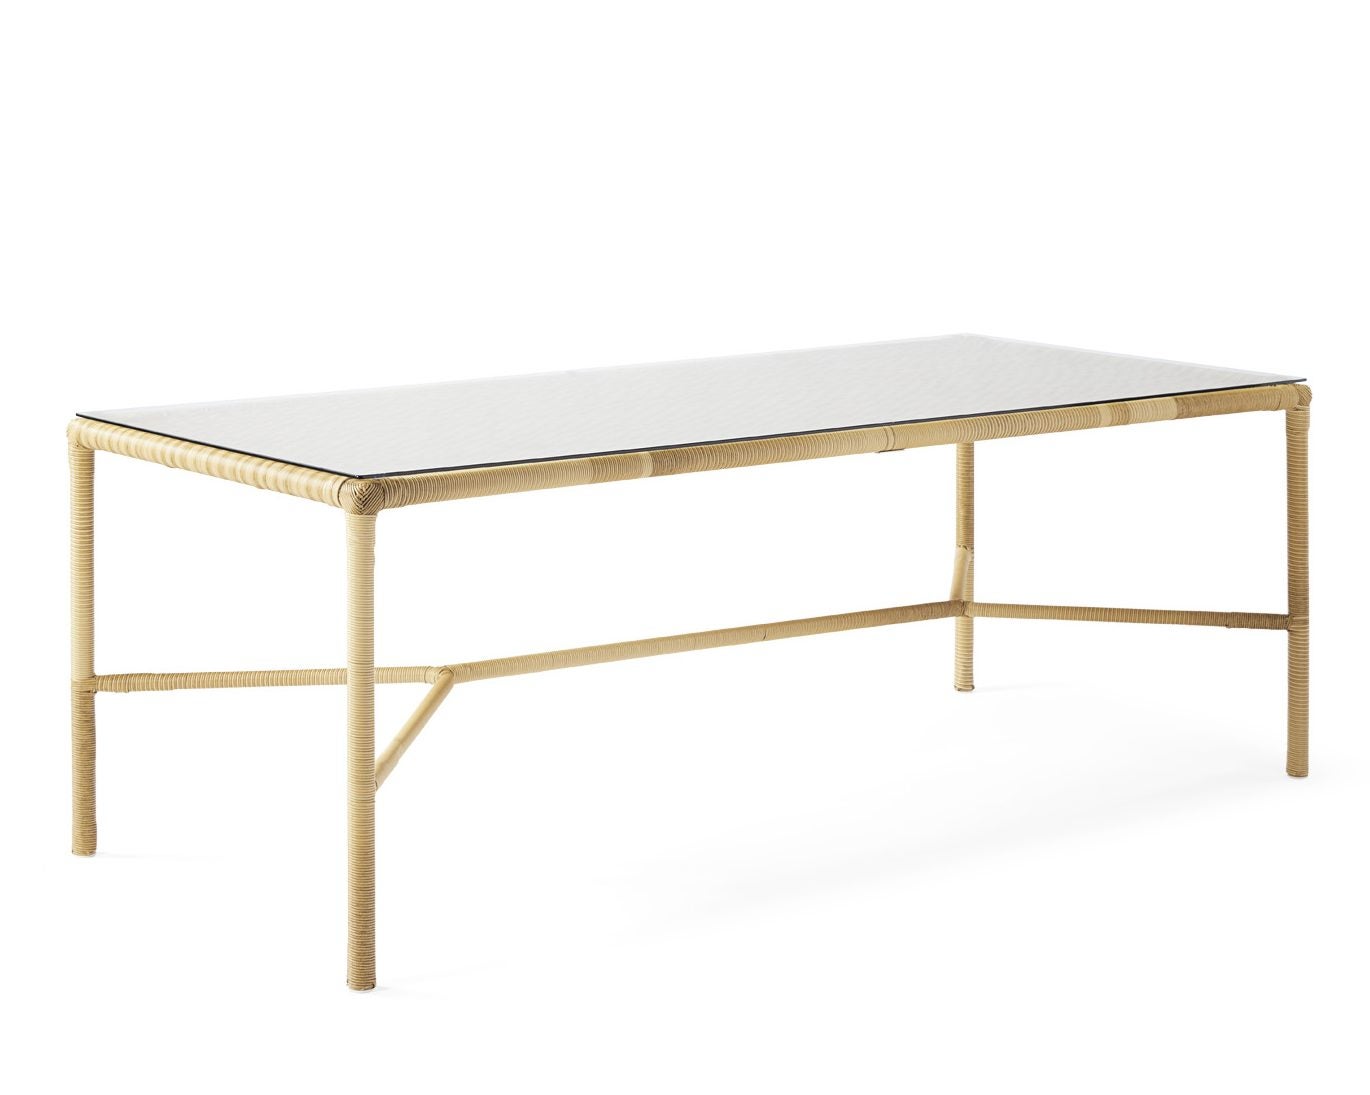 Furn_Pacifica_Dining_Table_Dune_Angle_MV_134_Crop_SH